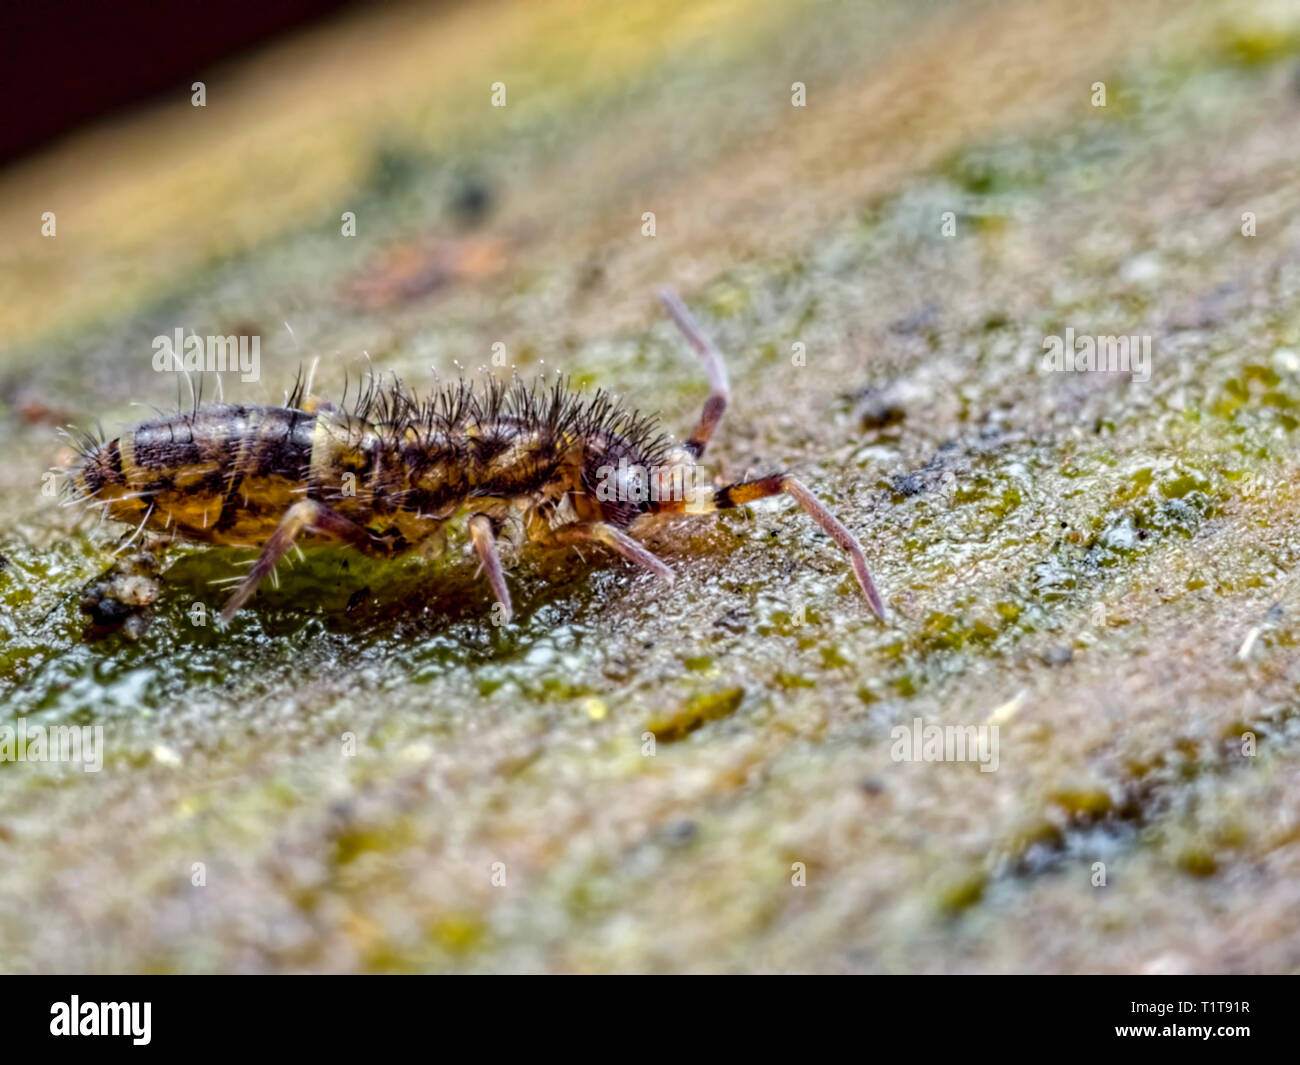 This is a Orchesella villosa elongated-bodied springtail who are densely hairy and one of the largest springtails. This one was found at Ramsdown wood Stock Photo